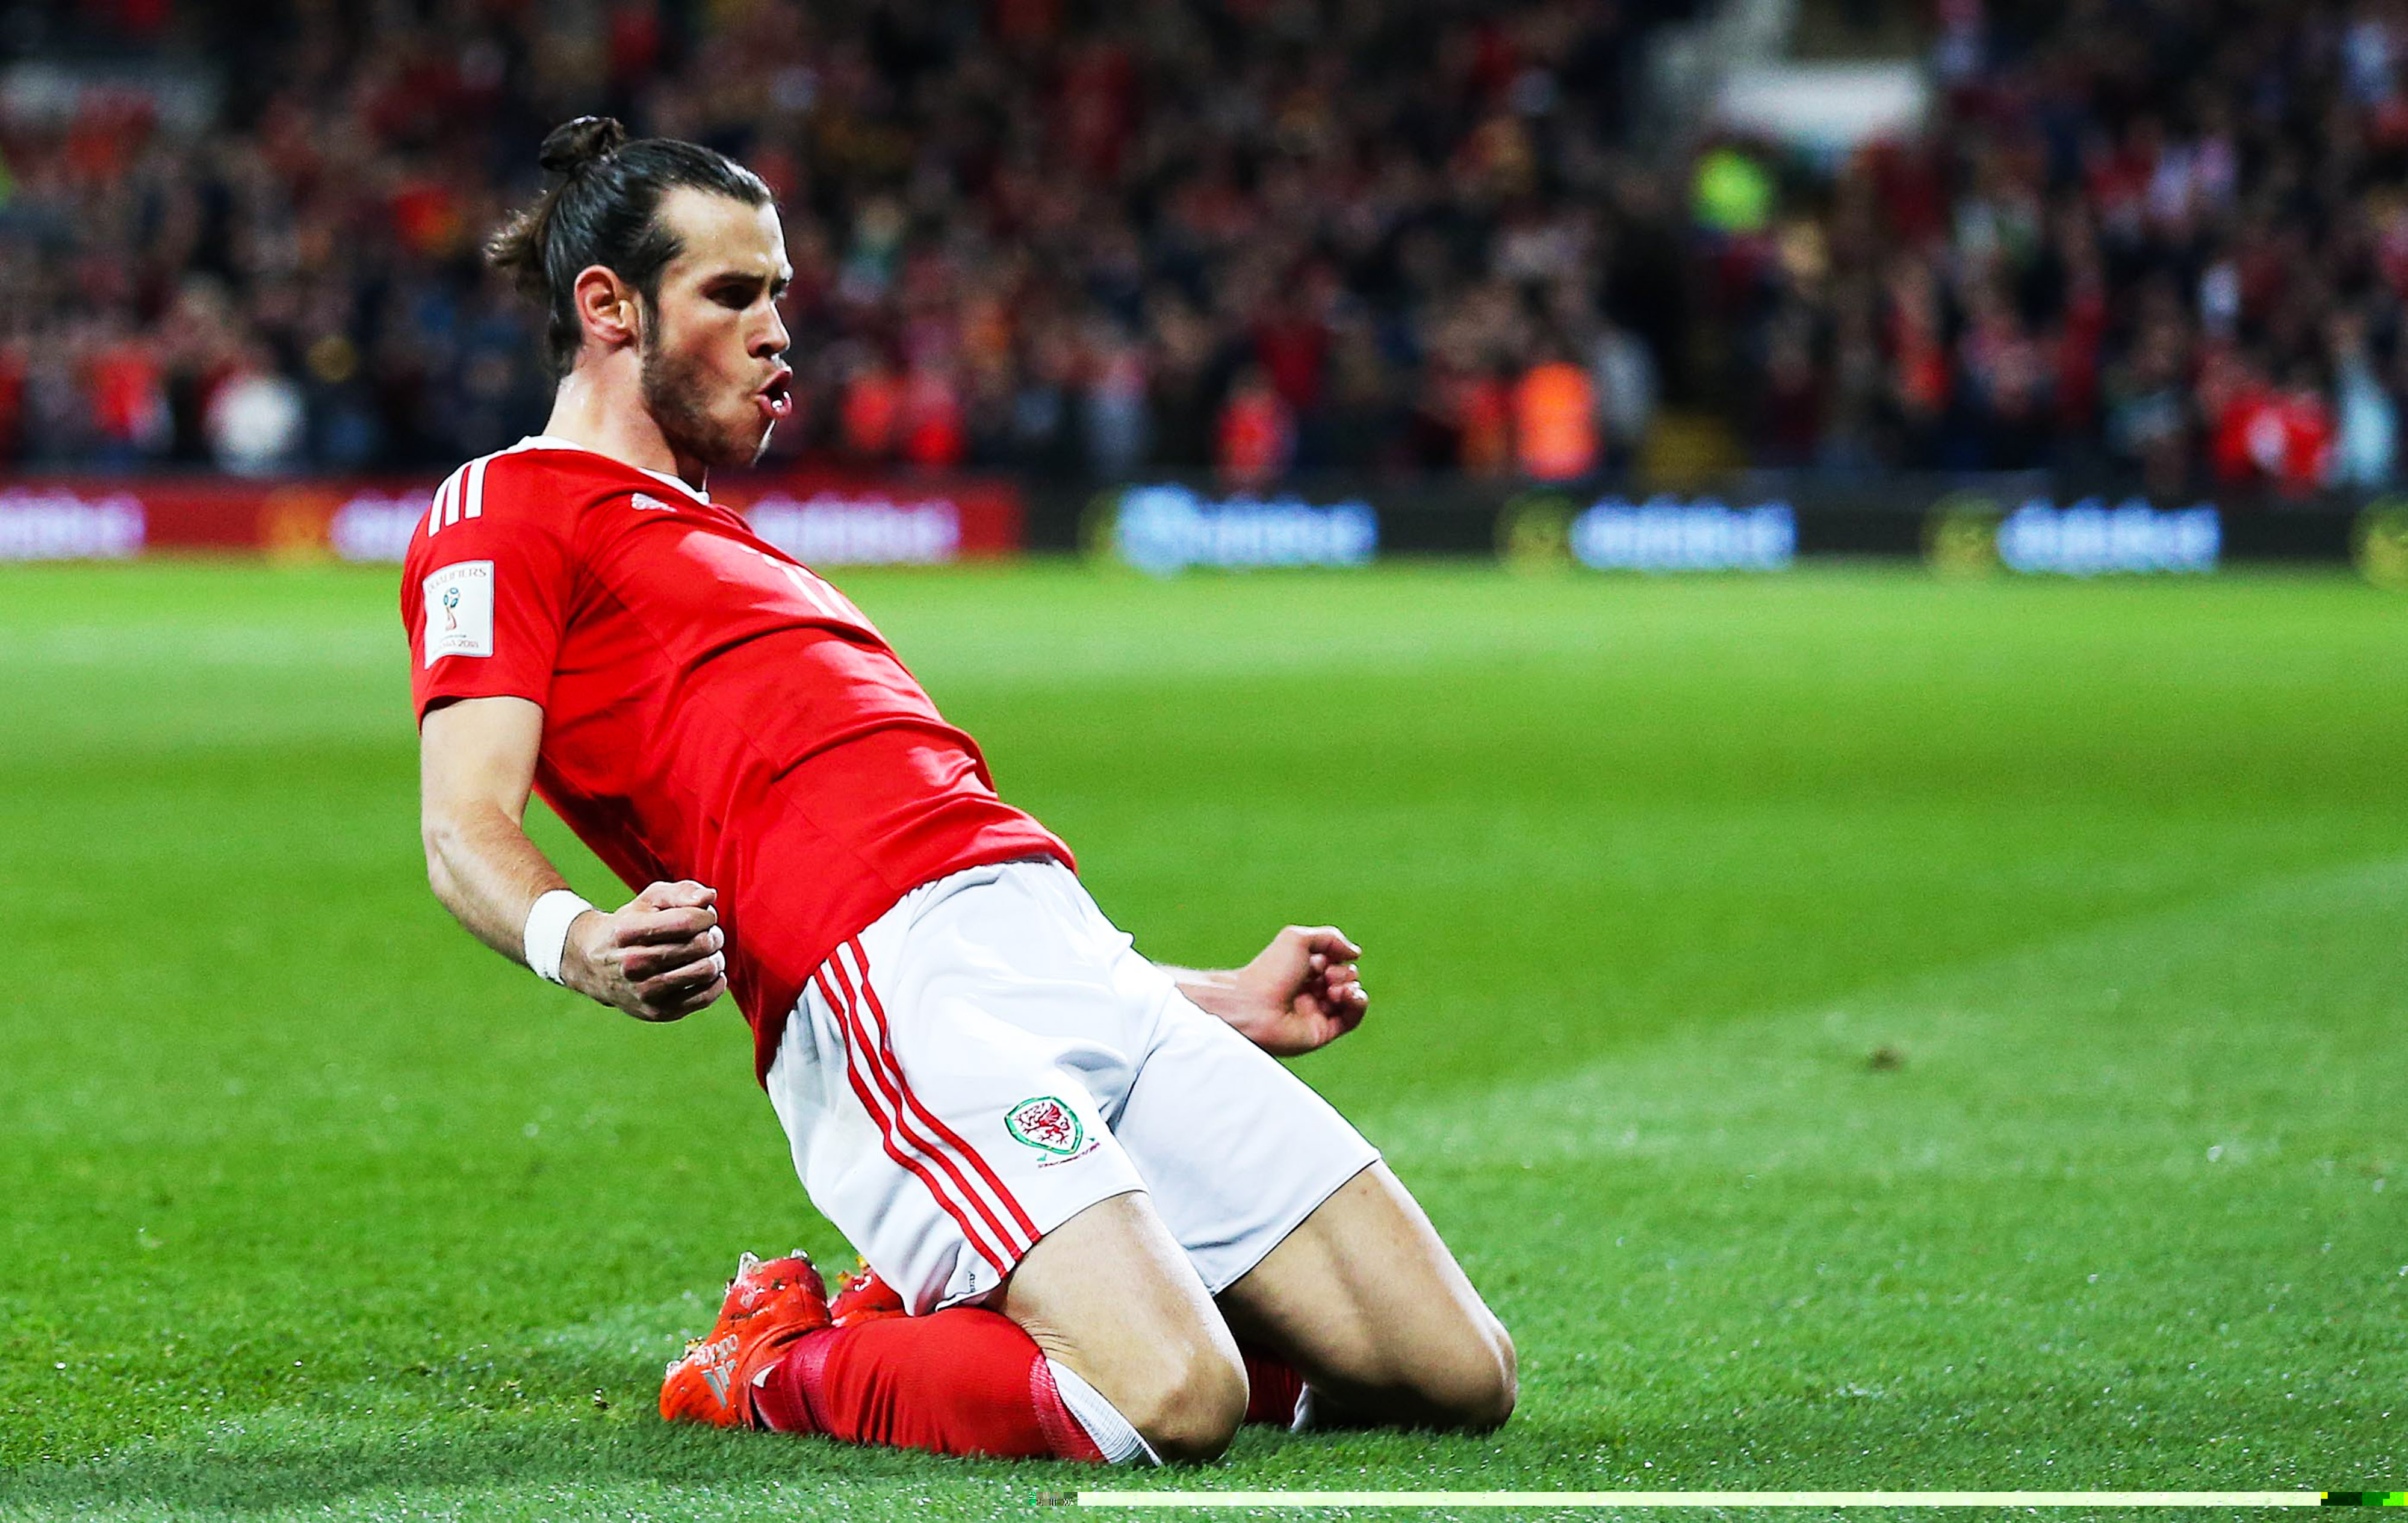 Gareth Bale of Wales celebrates scoring the opening goal during the FIFA 2018 World Cup Qualifying Group D match between Wales and Serbia played at Cardiff City Stadium, Cardiff on 12th November 2016 -------------------- James Marsh / BPI / Icon Sport